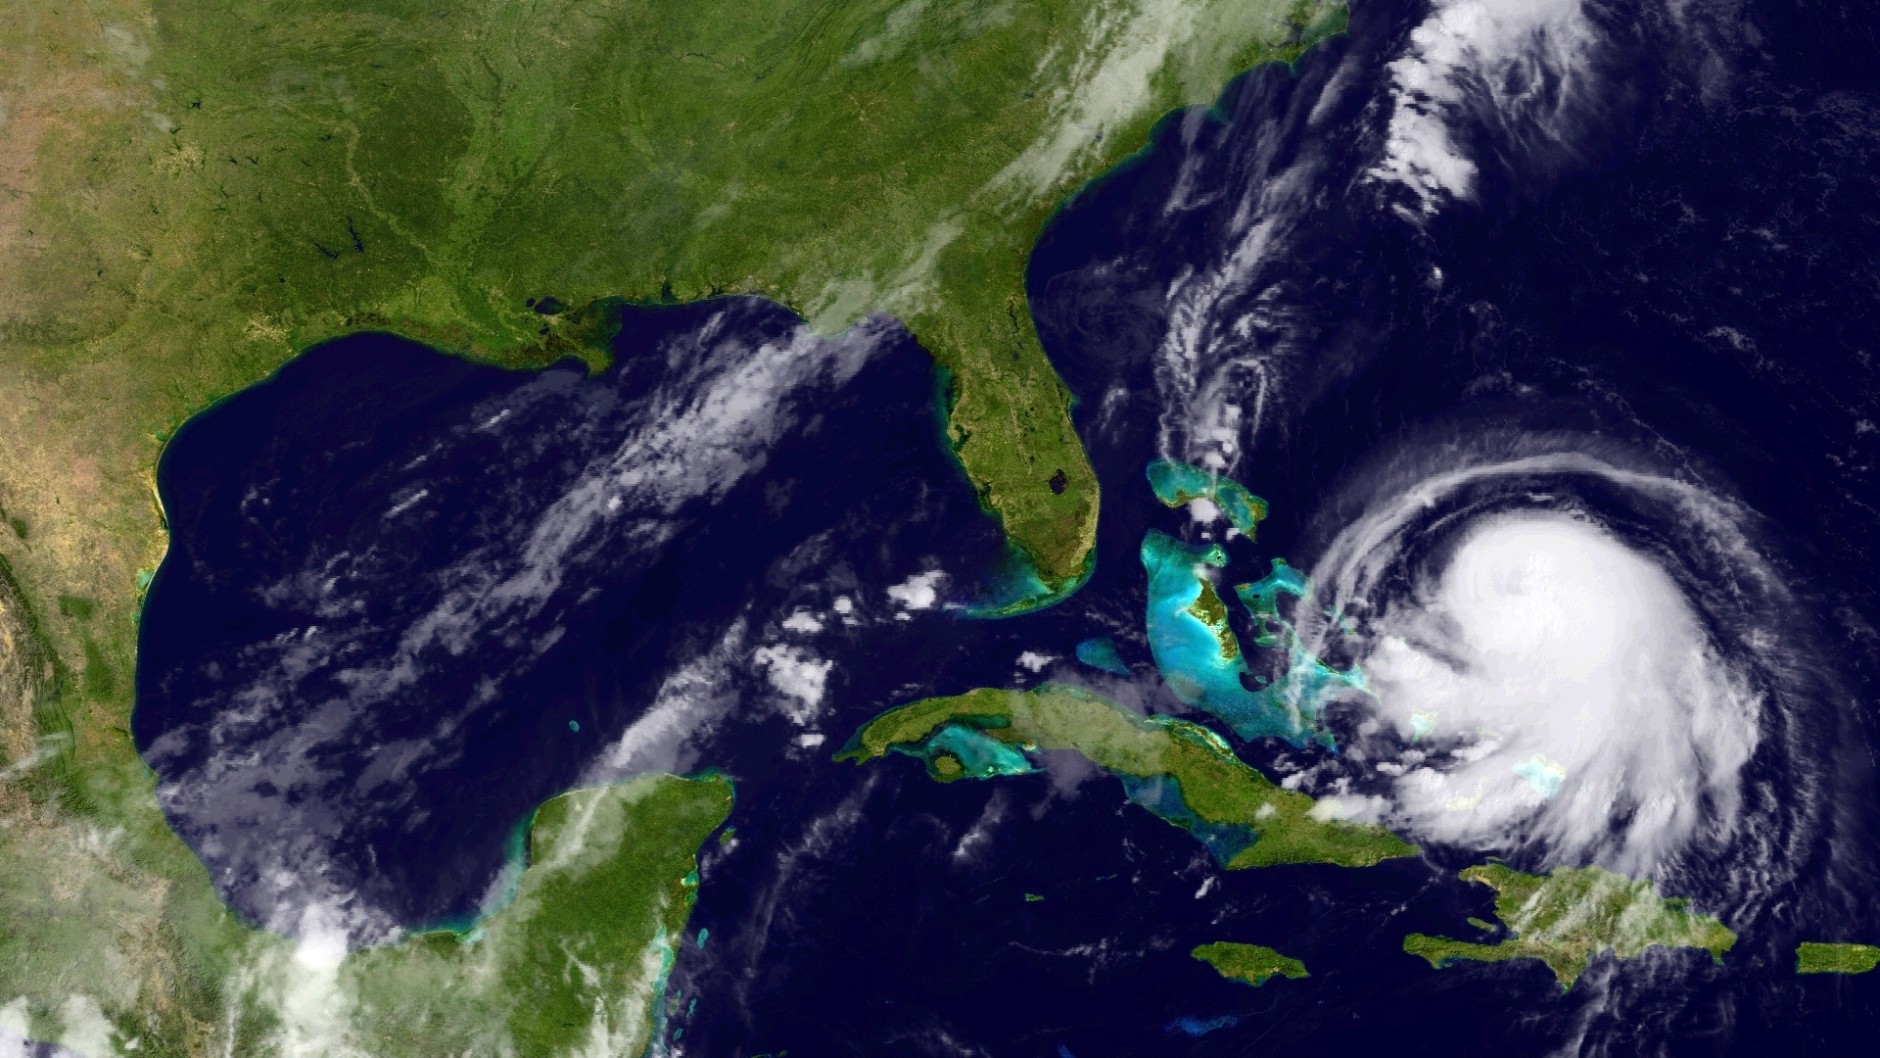 IN SPACE - SEPTEMBER 30:  In this handout from the National Oceanic and Atmospheric Administration (NOAA), Hurricane Joaquin is seen chruning in the Caribbean September 30, 2015. Joaquin was upgraded to a category 1 hurricane early on September 30. The exact track has yet to be determined, but there is a  possibity of landfall in the U.S. anywhere from North Carolina to the Northeast.  (Photo by NOAA via Getty Images)